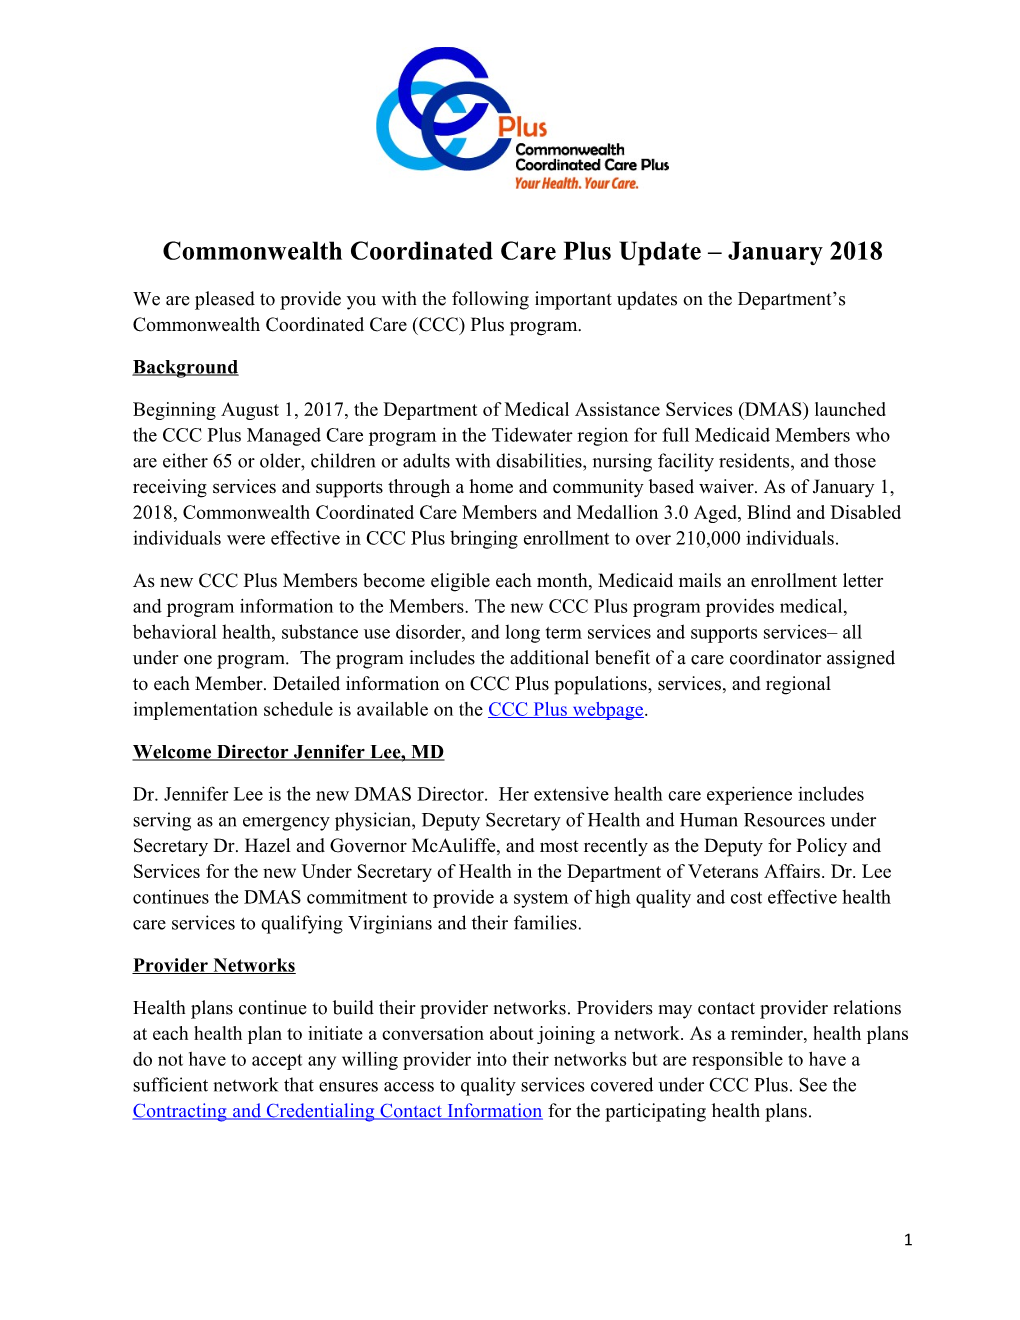 Commonwealth Coordinated Care Plus Update January2018